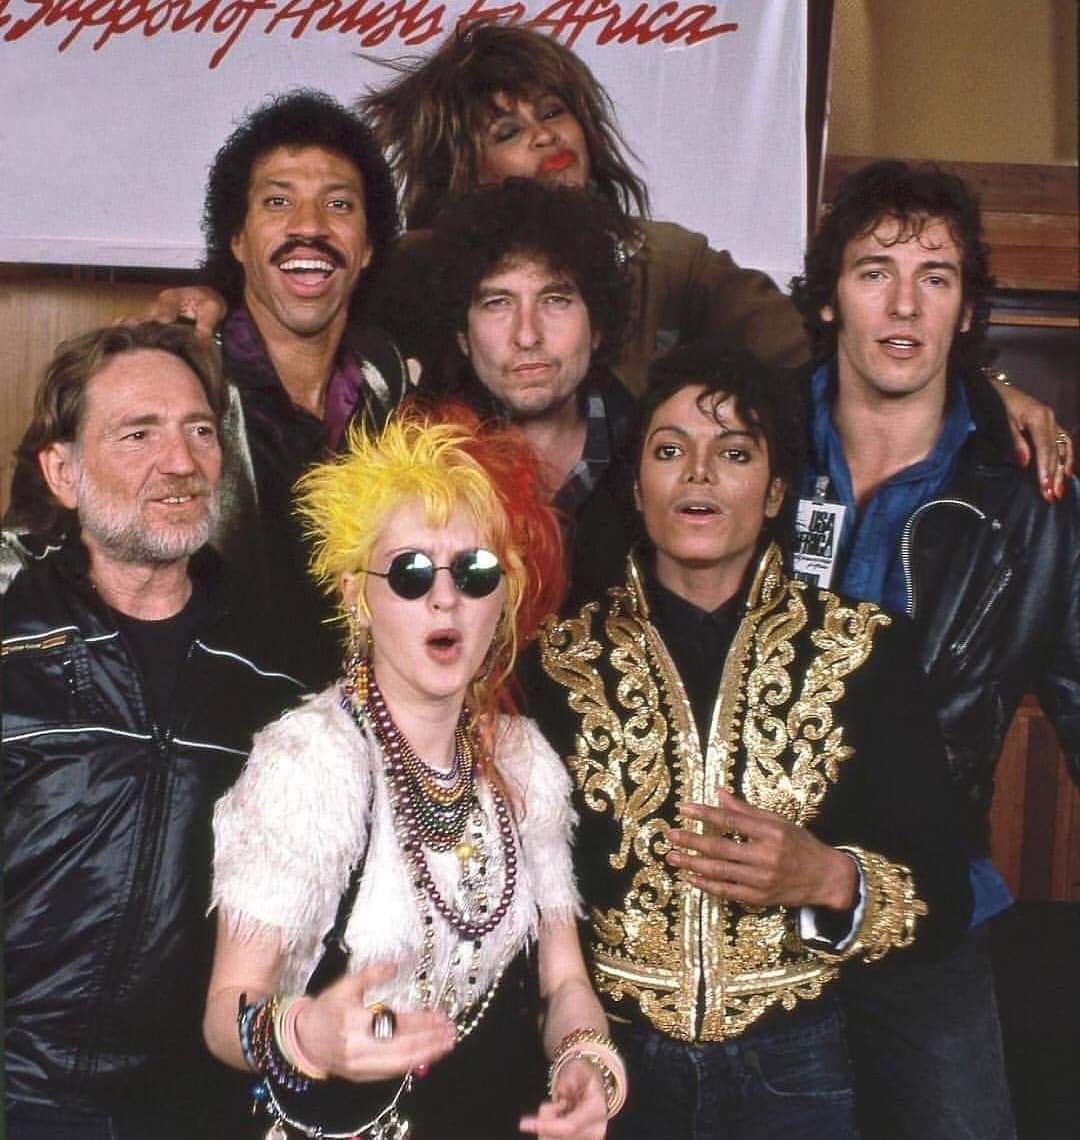 Willie with @LionelRichie, @tinaturner, @bobdylan, @springsteen, #CyndiLauper, and @michaeljackson at the recording of #WeAreTheWorld. Do you know what year this song was recorded?